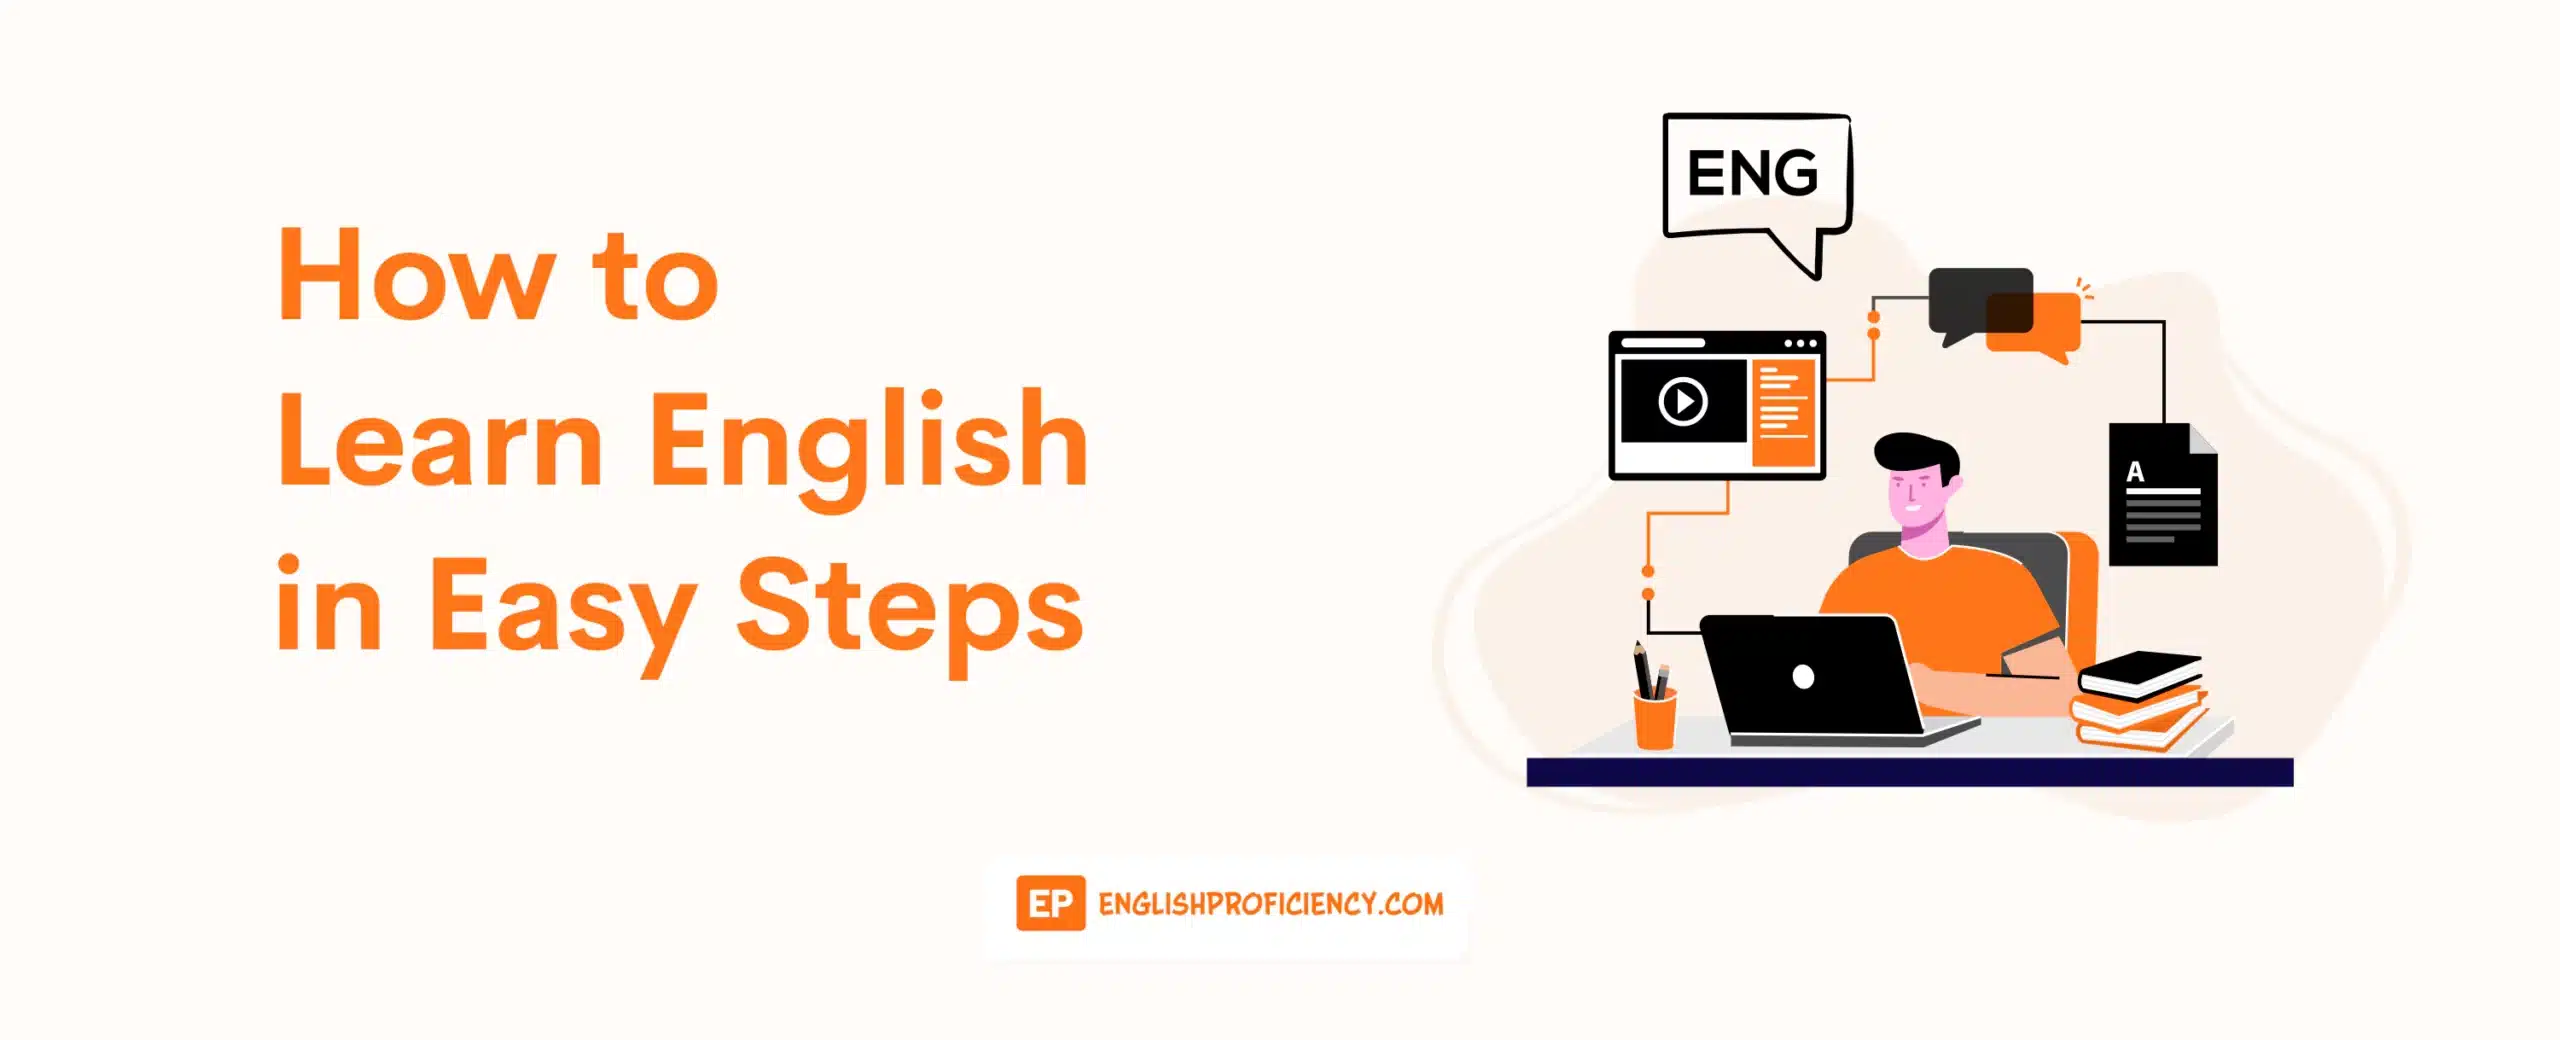 How to Learn English in Easy Steps